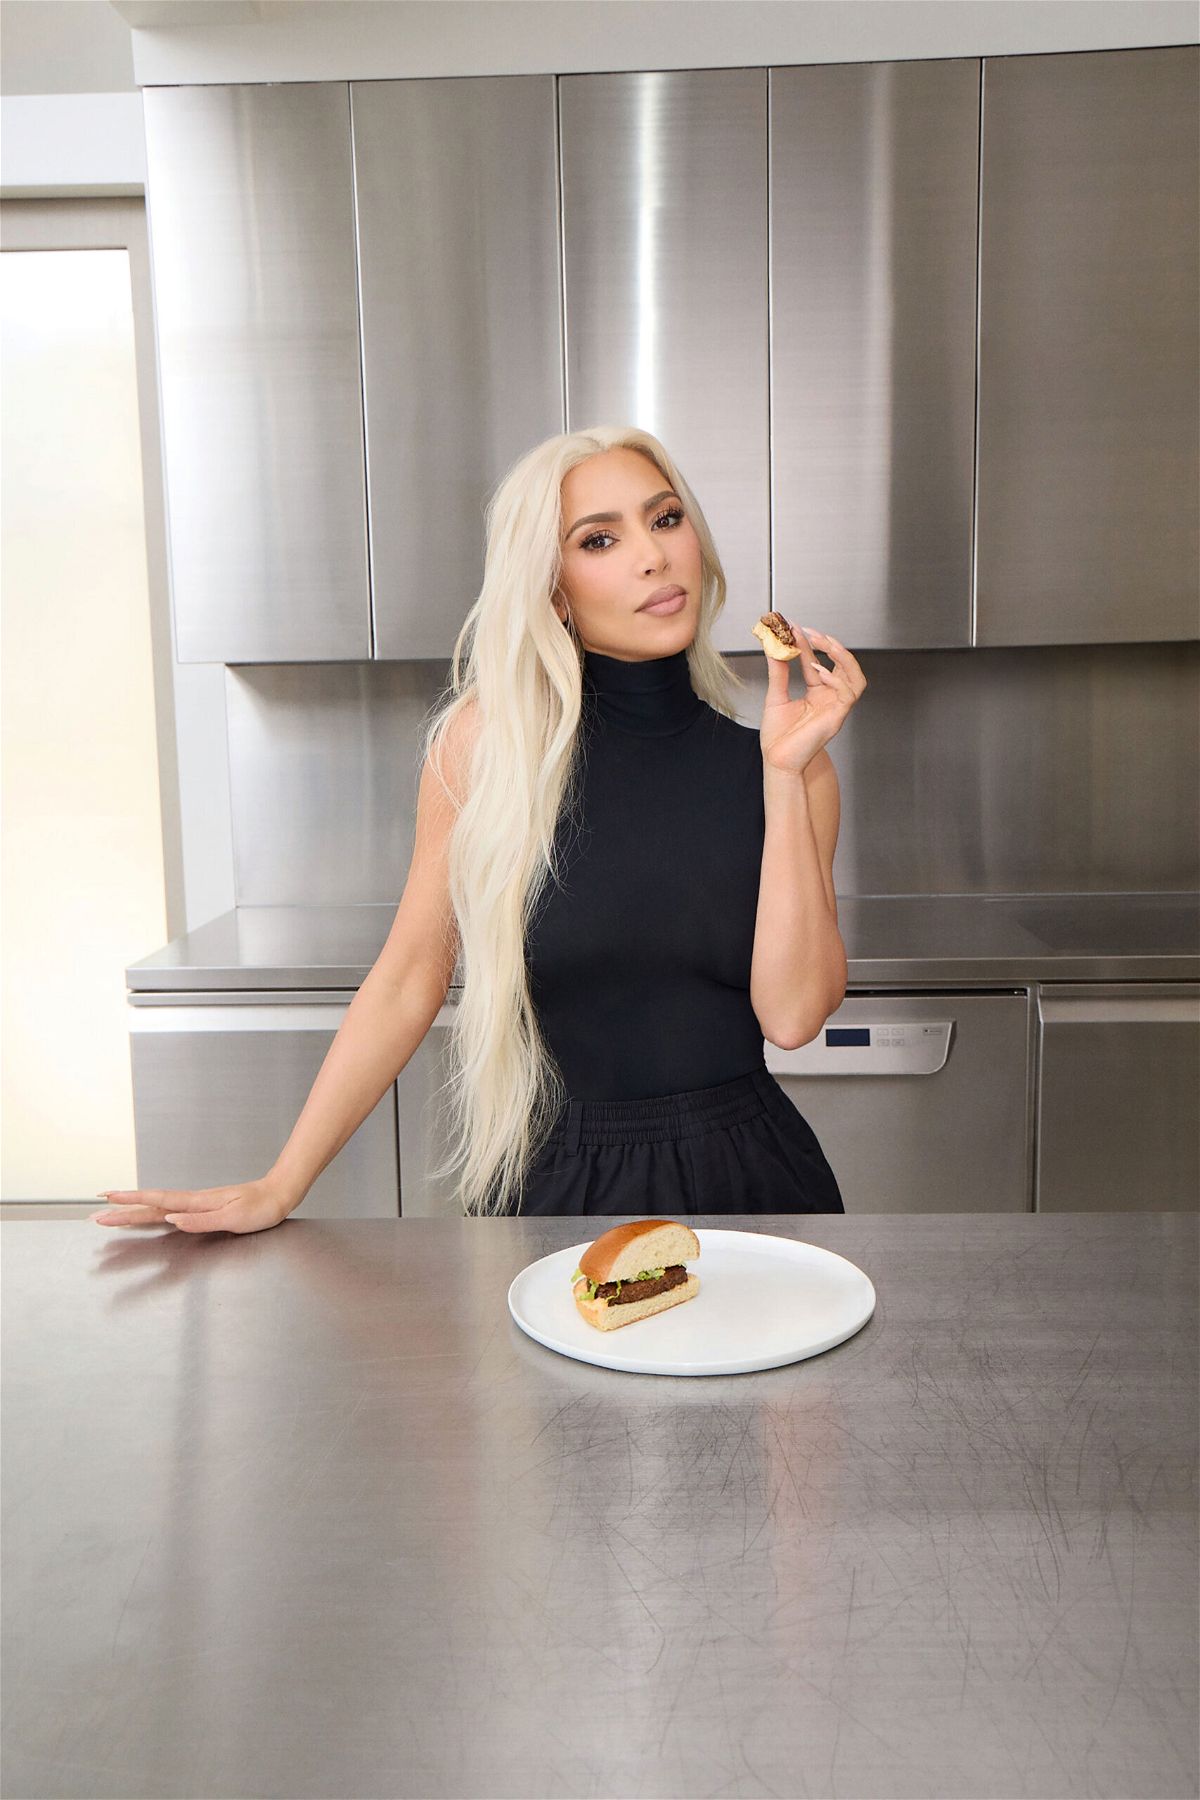 <i>From Beyond Meat</i><br/>Kim Kardashian has gone beyond just sharing her recipe for vegan tacos. The mogul is using her star power to promote Beyond Meat in a campaign that finds her with a a fancy new title - Chief Taste Consultant.